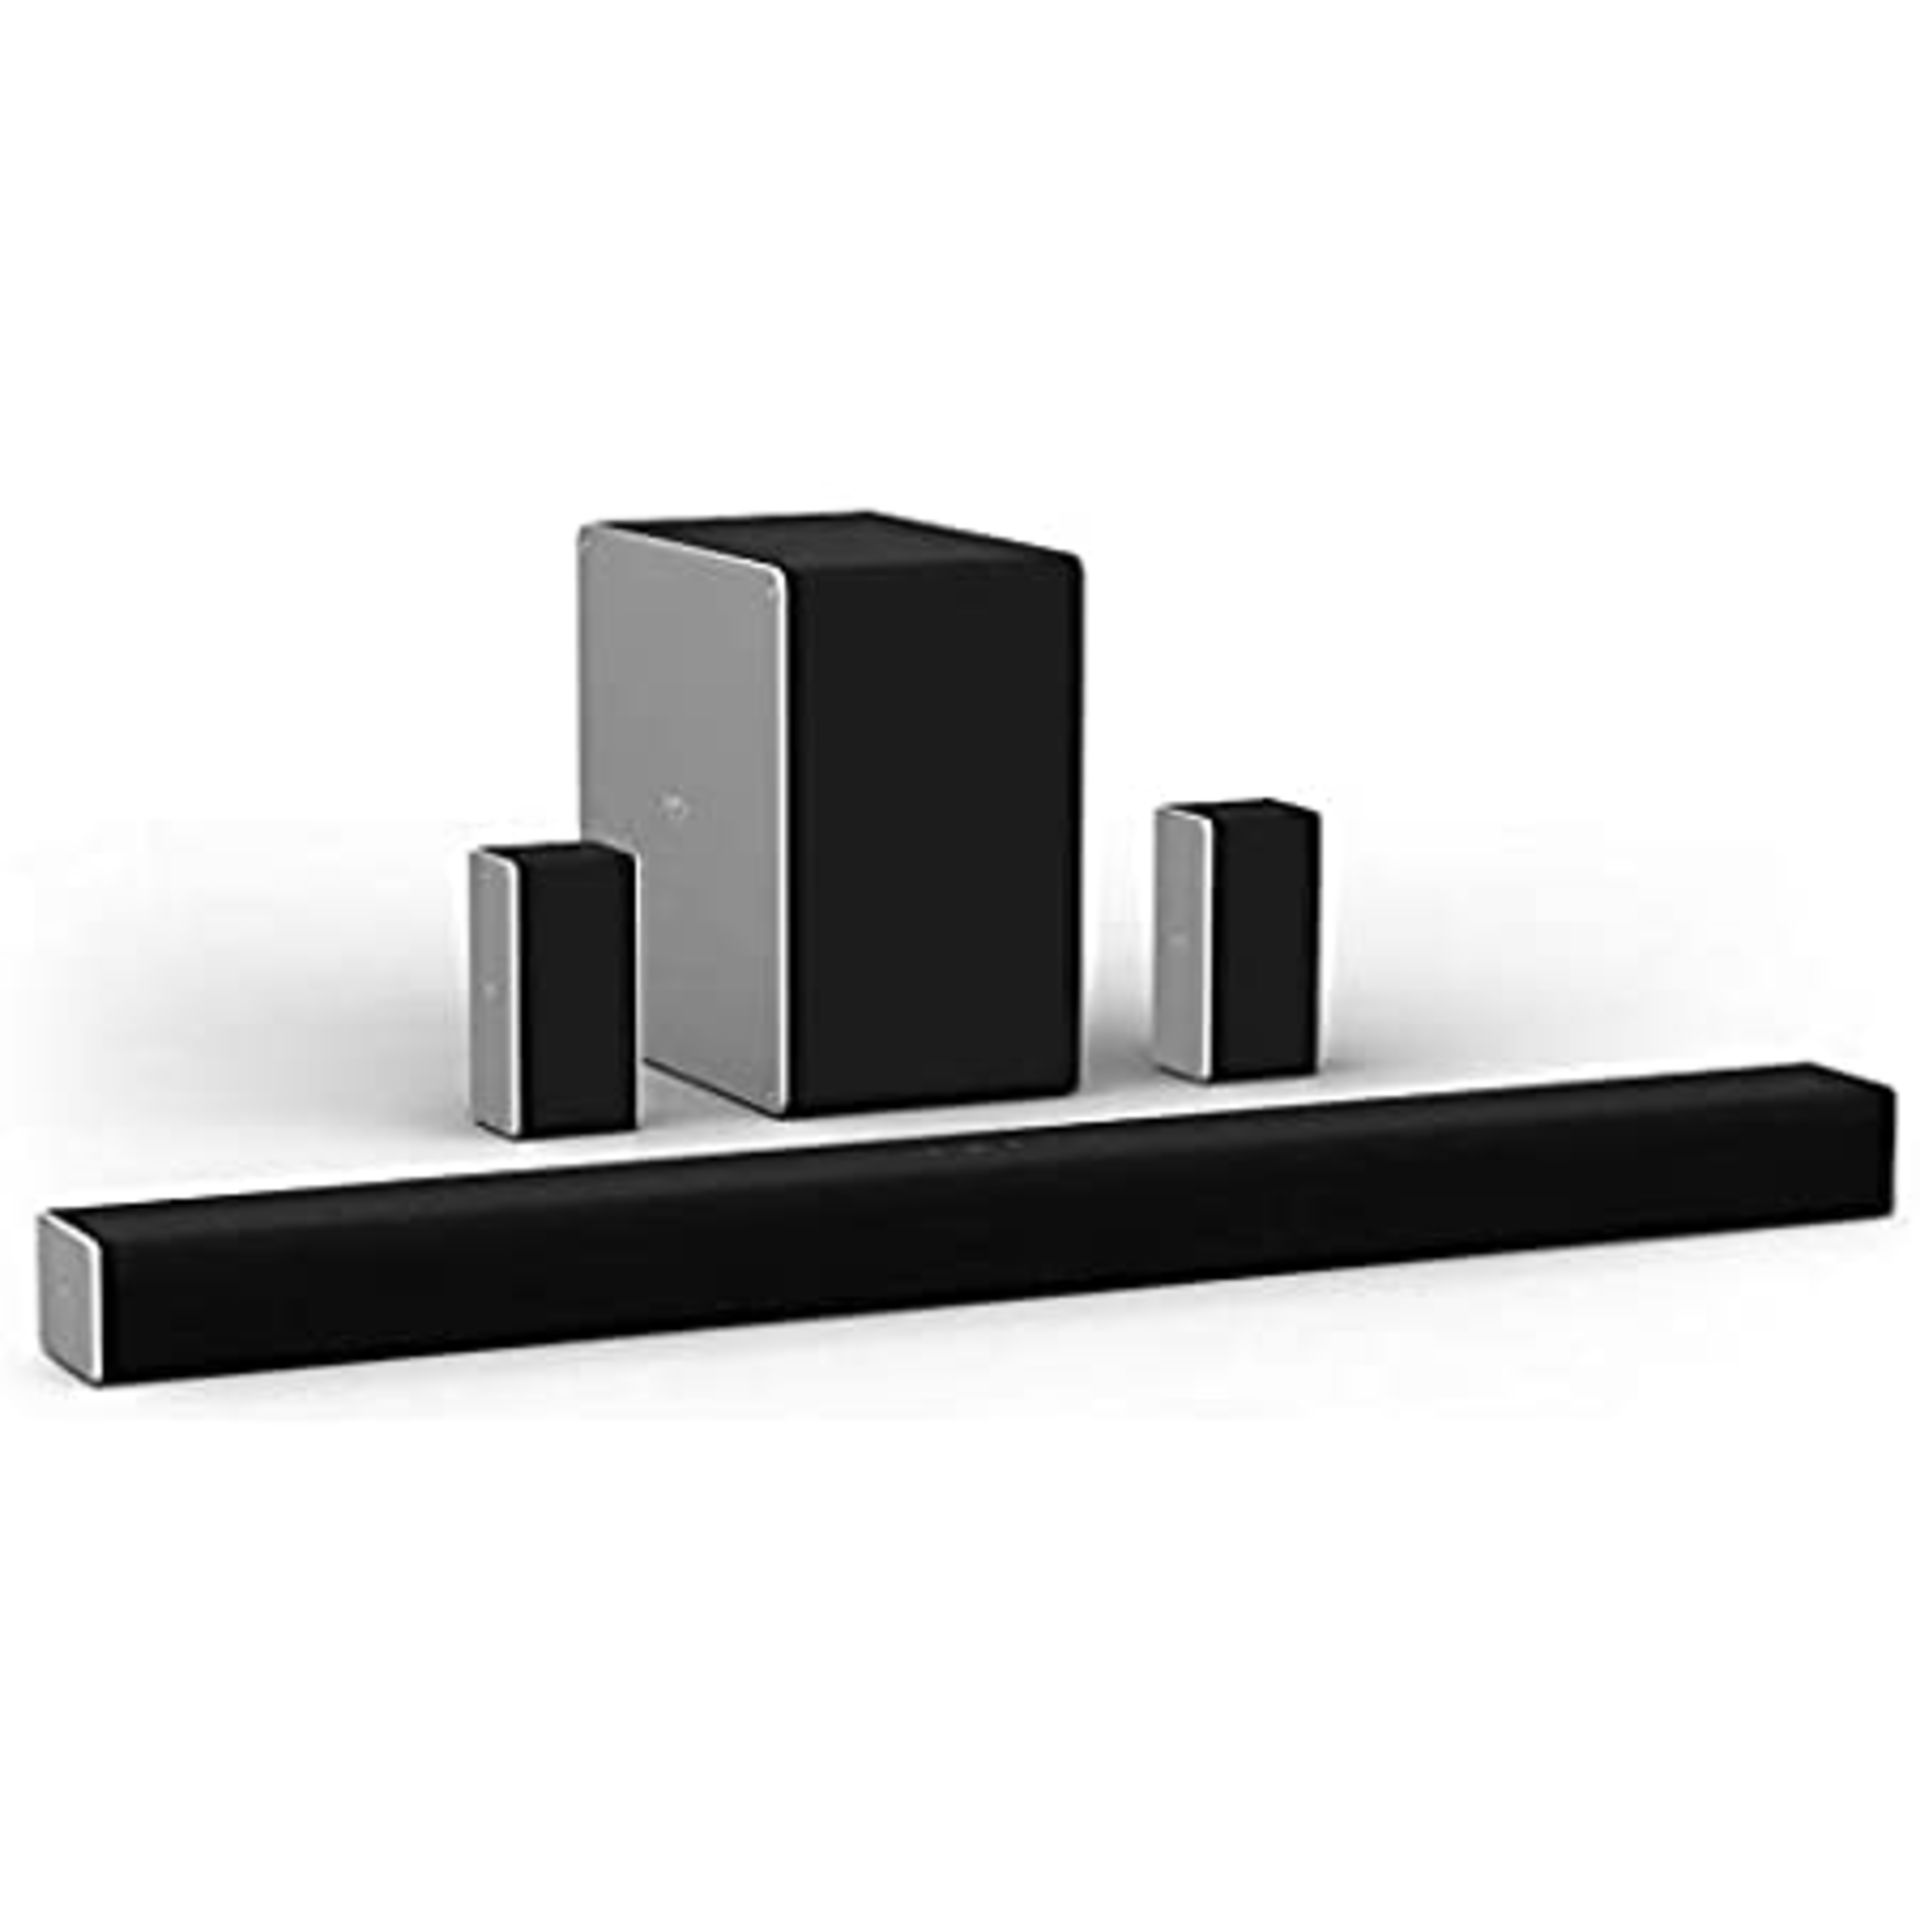 VIZIO 5.1.2 HOME THEATRE SOUND SYSTEM WITH DOLBY ATMOS RRP £220.00Condition ReportAppraisal